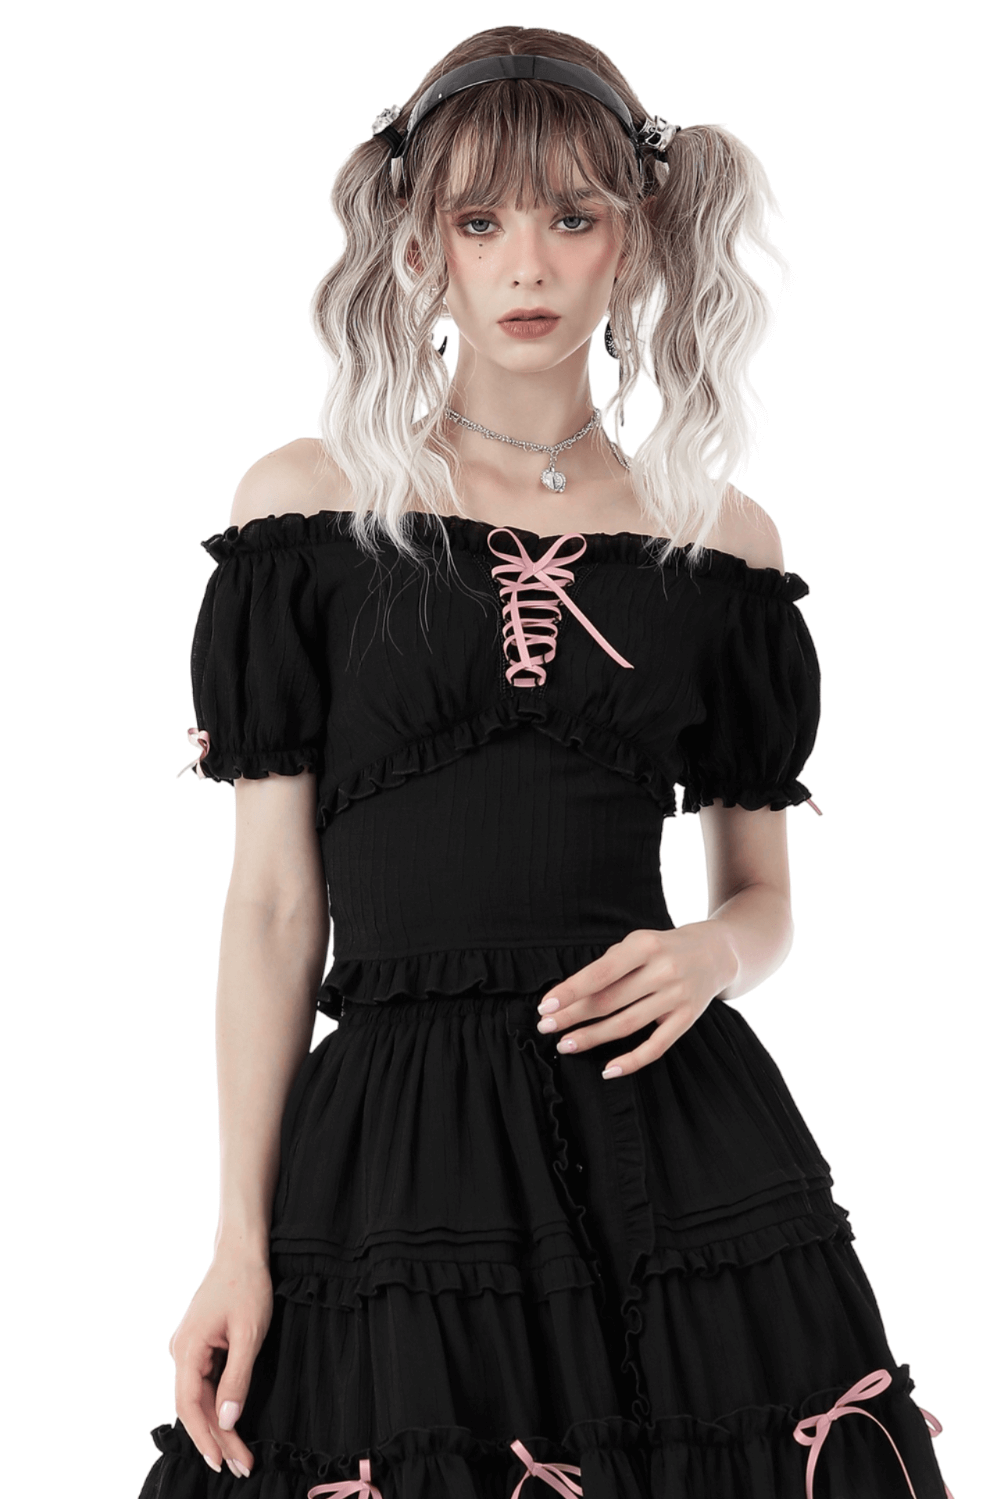 Black Gothic Off-the-Shoulder Top with Pink Ribbon Detailing